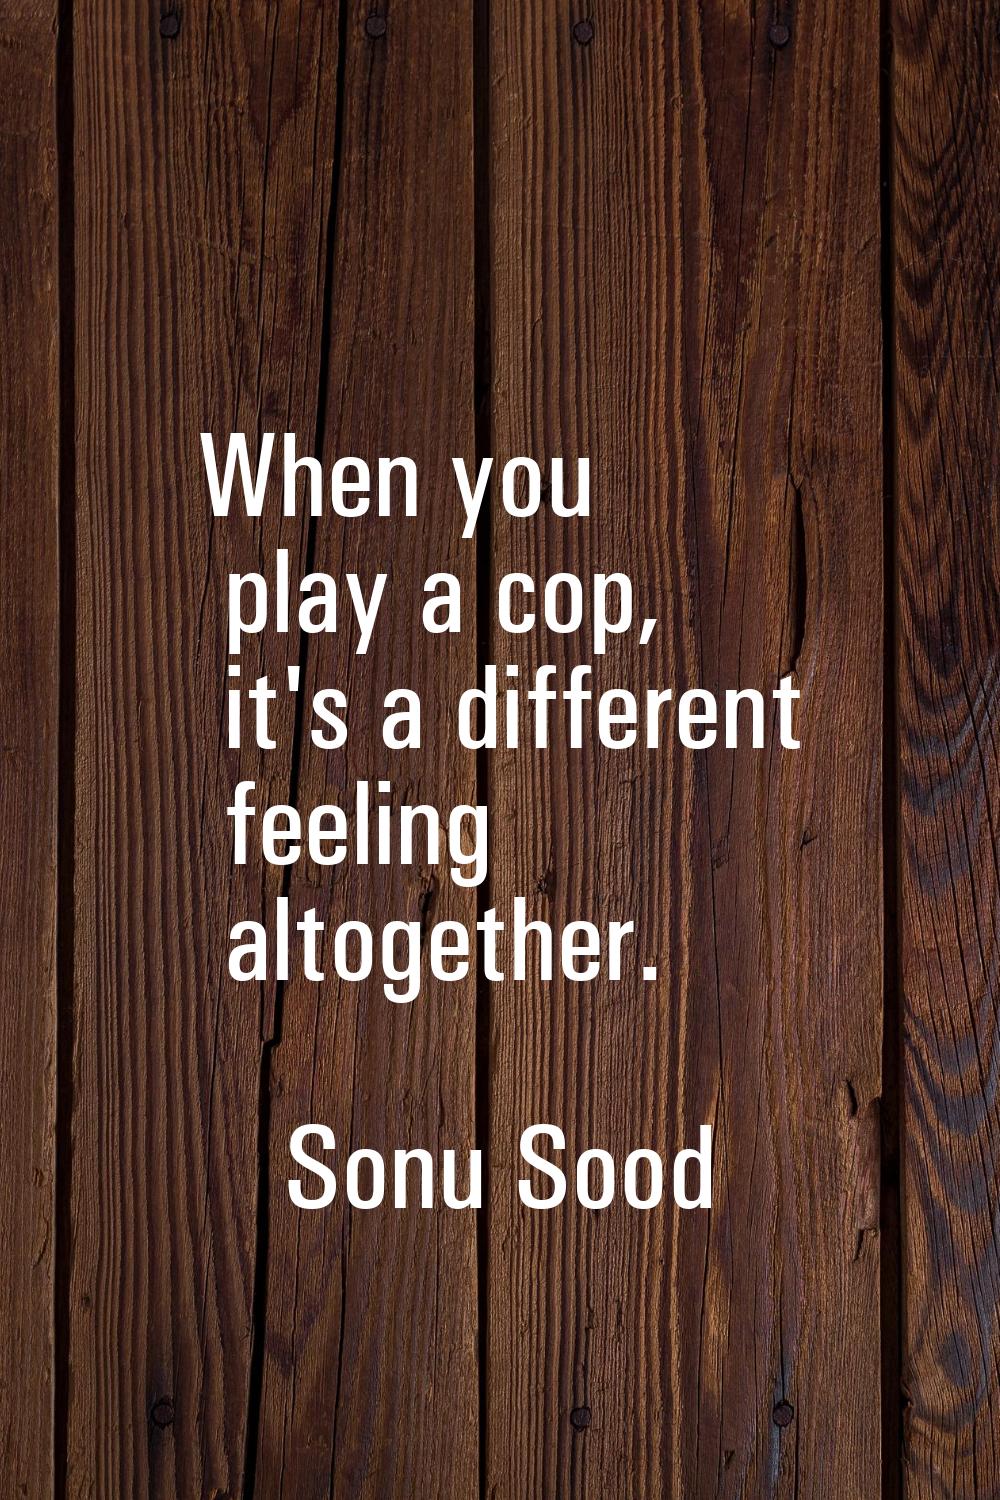 When you play a cop, it's a different feeling altogether.